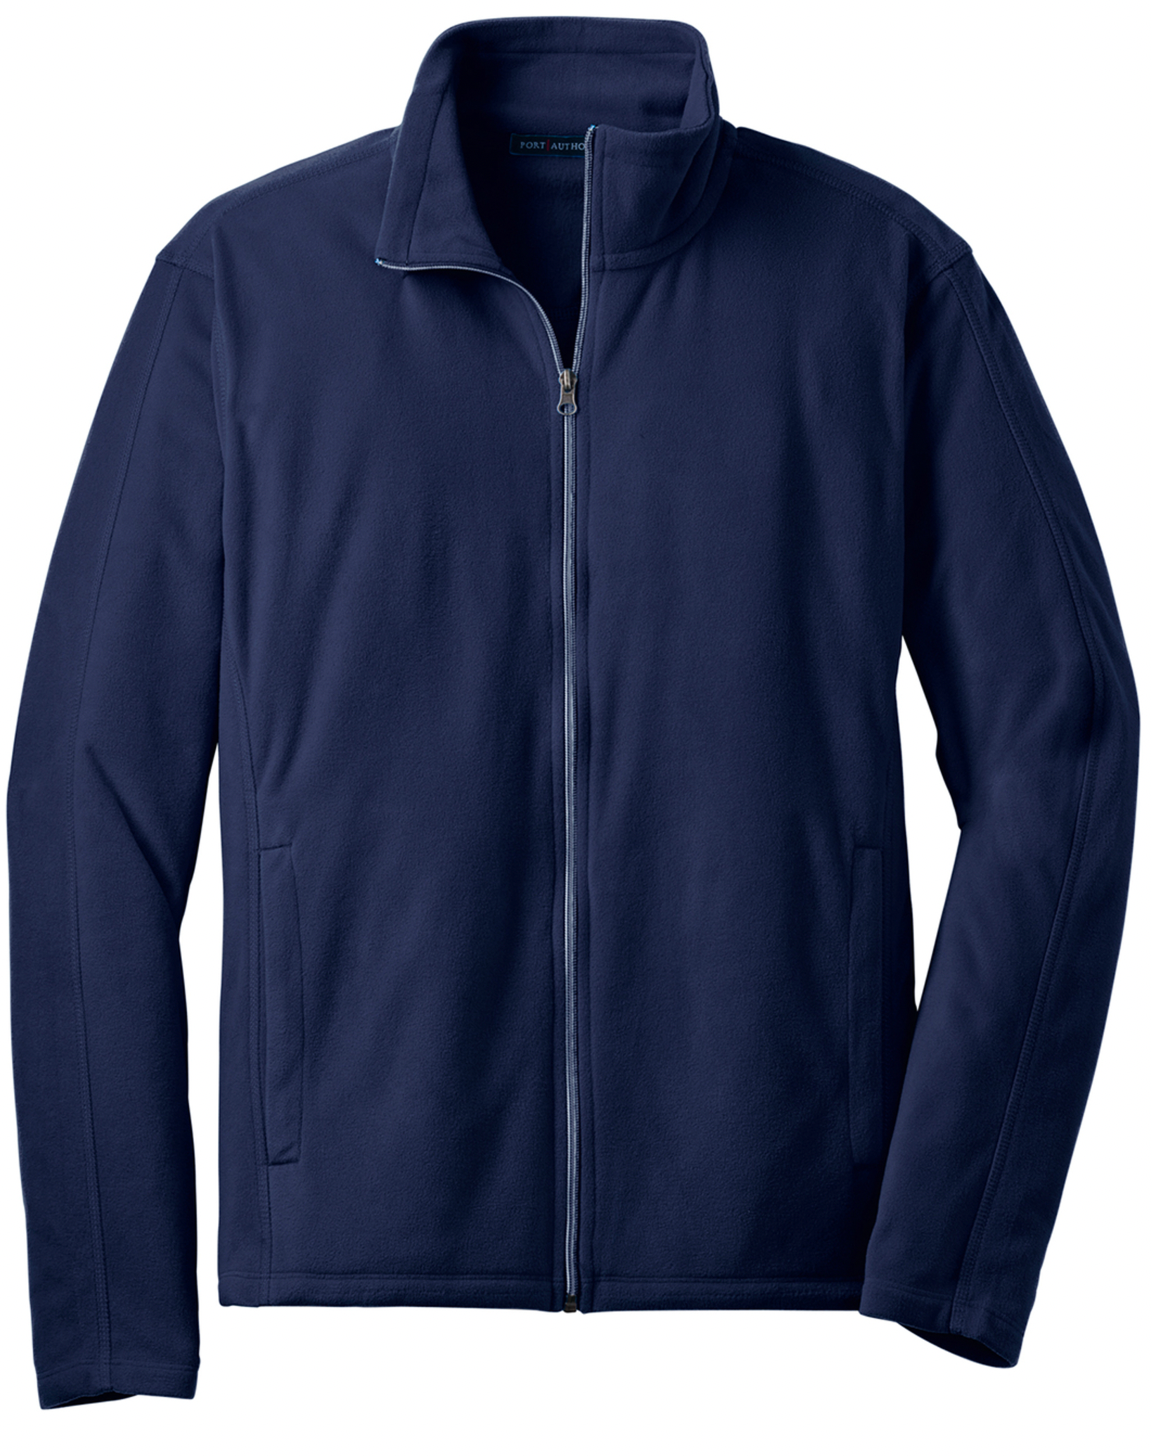 Integrated Services Housing Microfleece Jacket